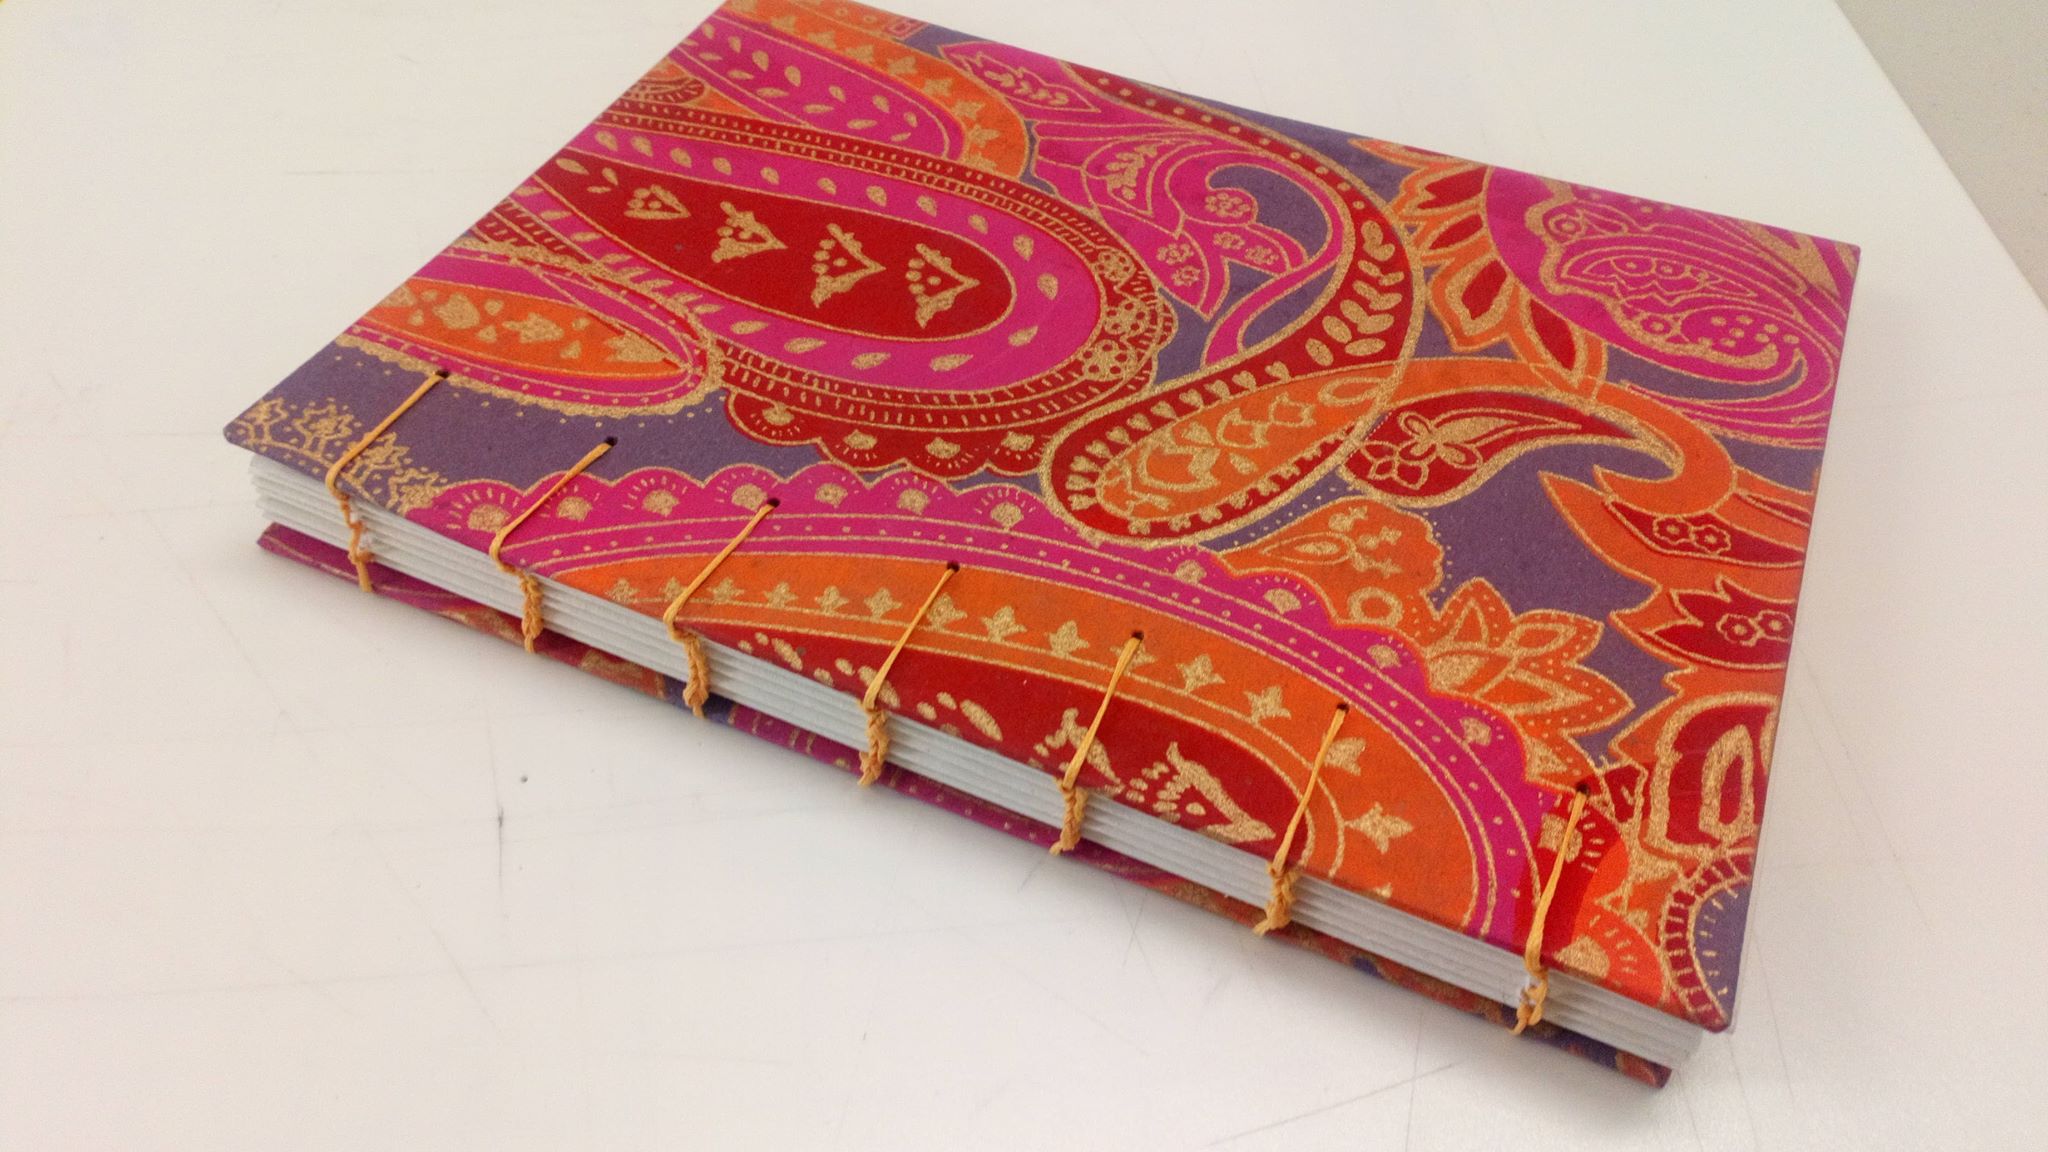 Coptic bound book made by Jemma